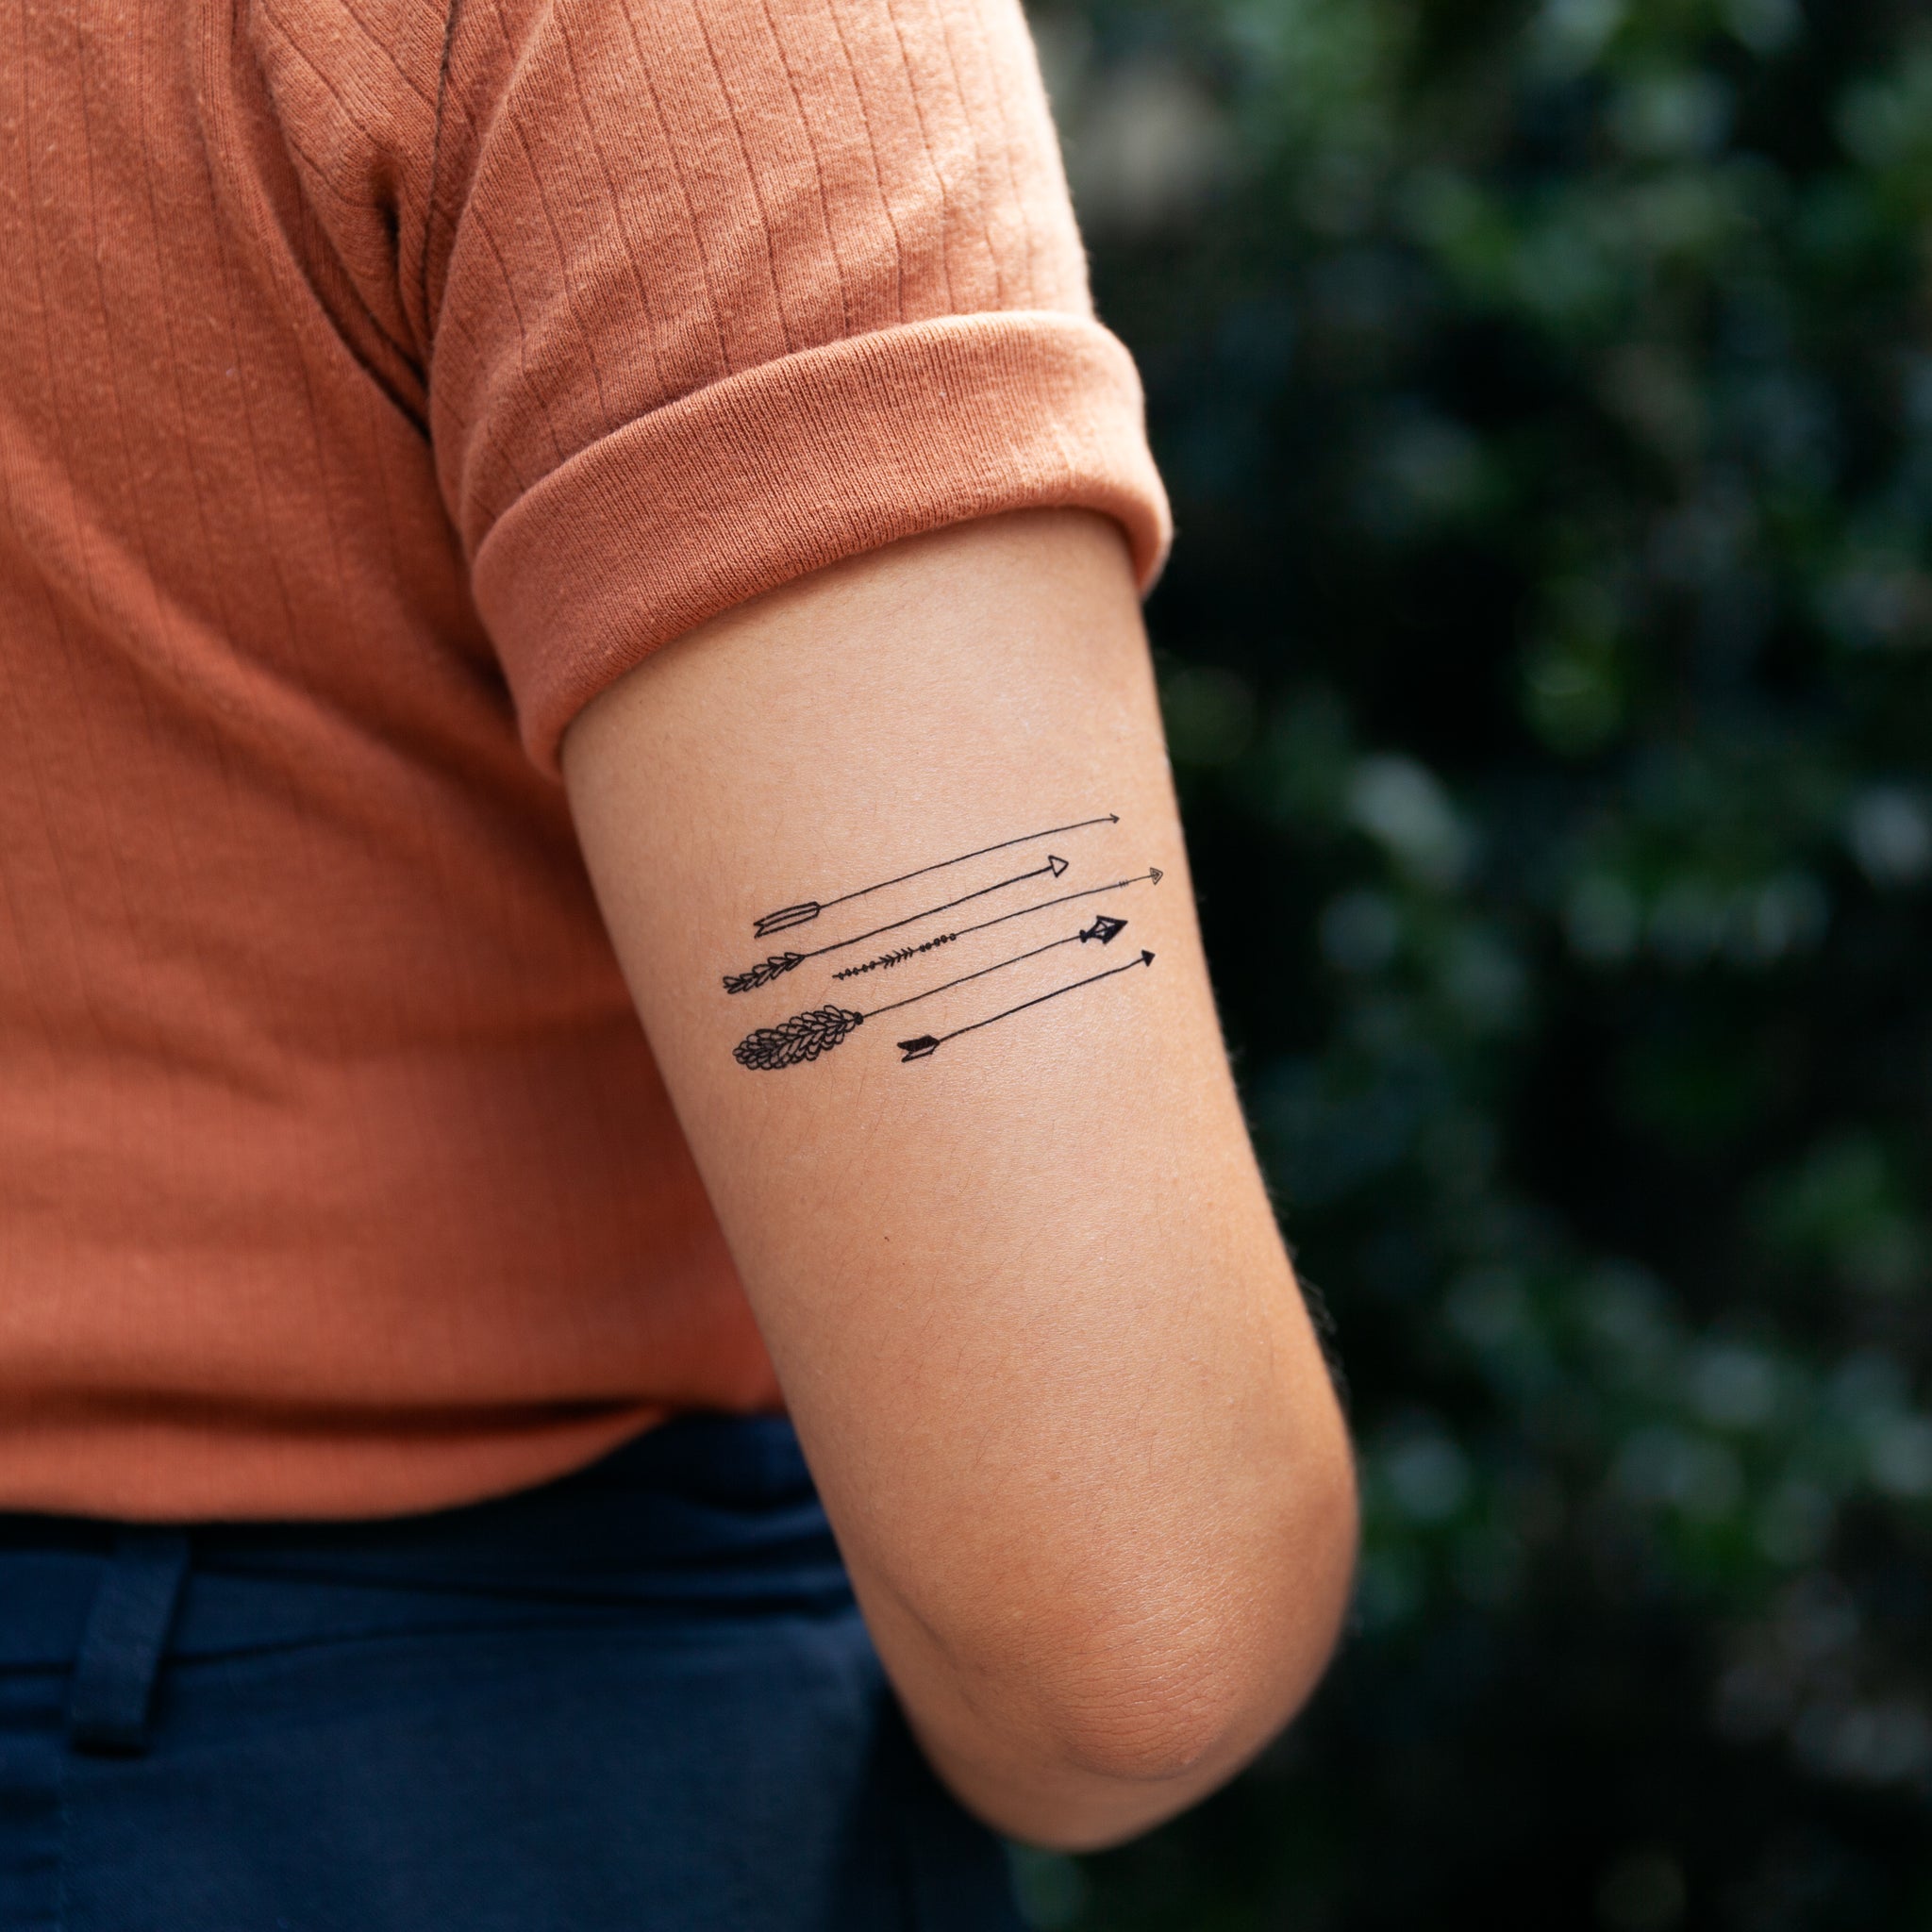 20 Meaningful Mountain Tattoo Designs for Nature Lovers